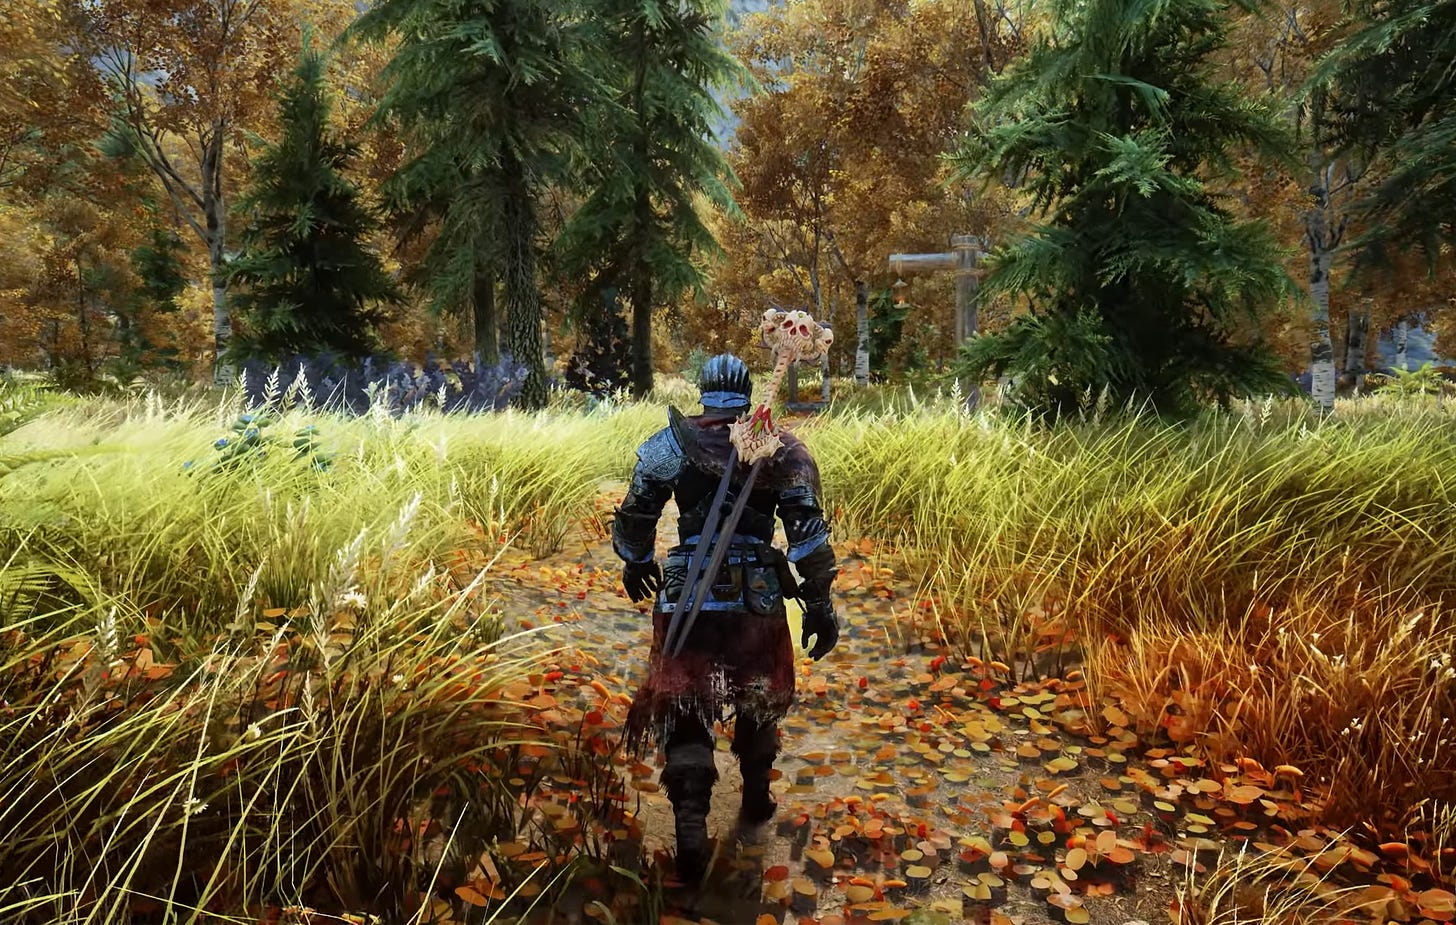 Skyrim' player shows off stunning gameplay with 500 mods enabled